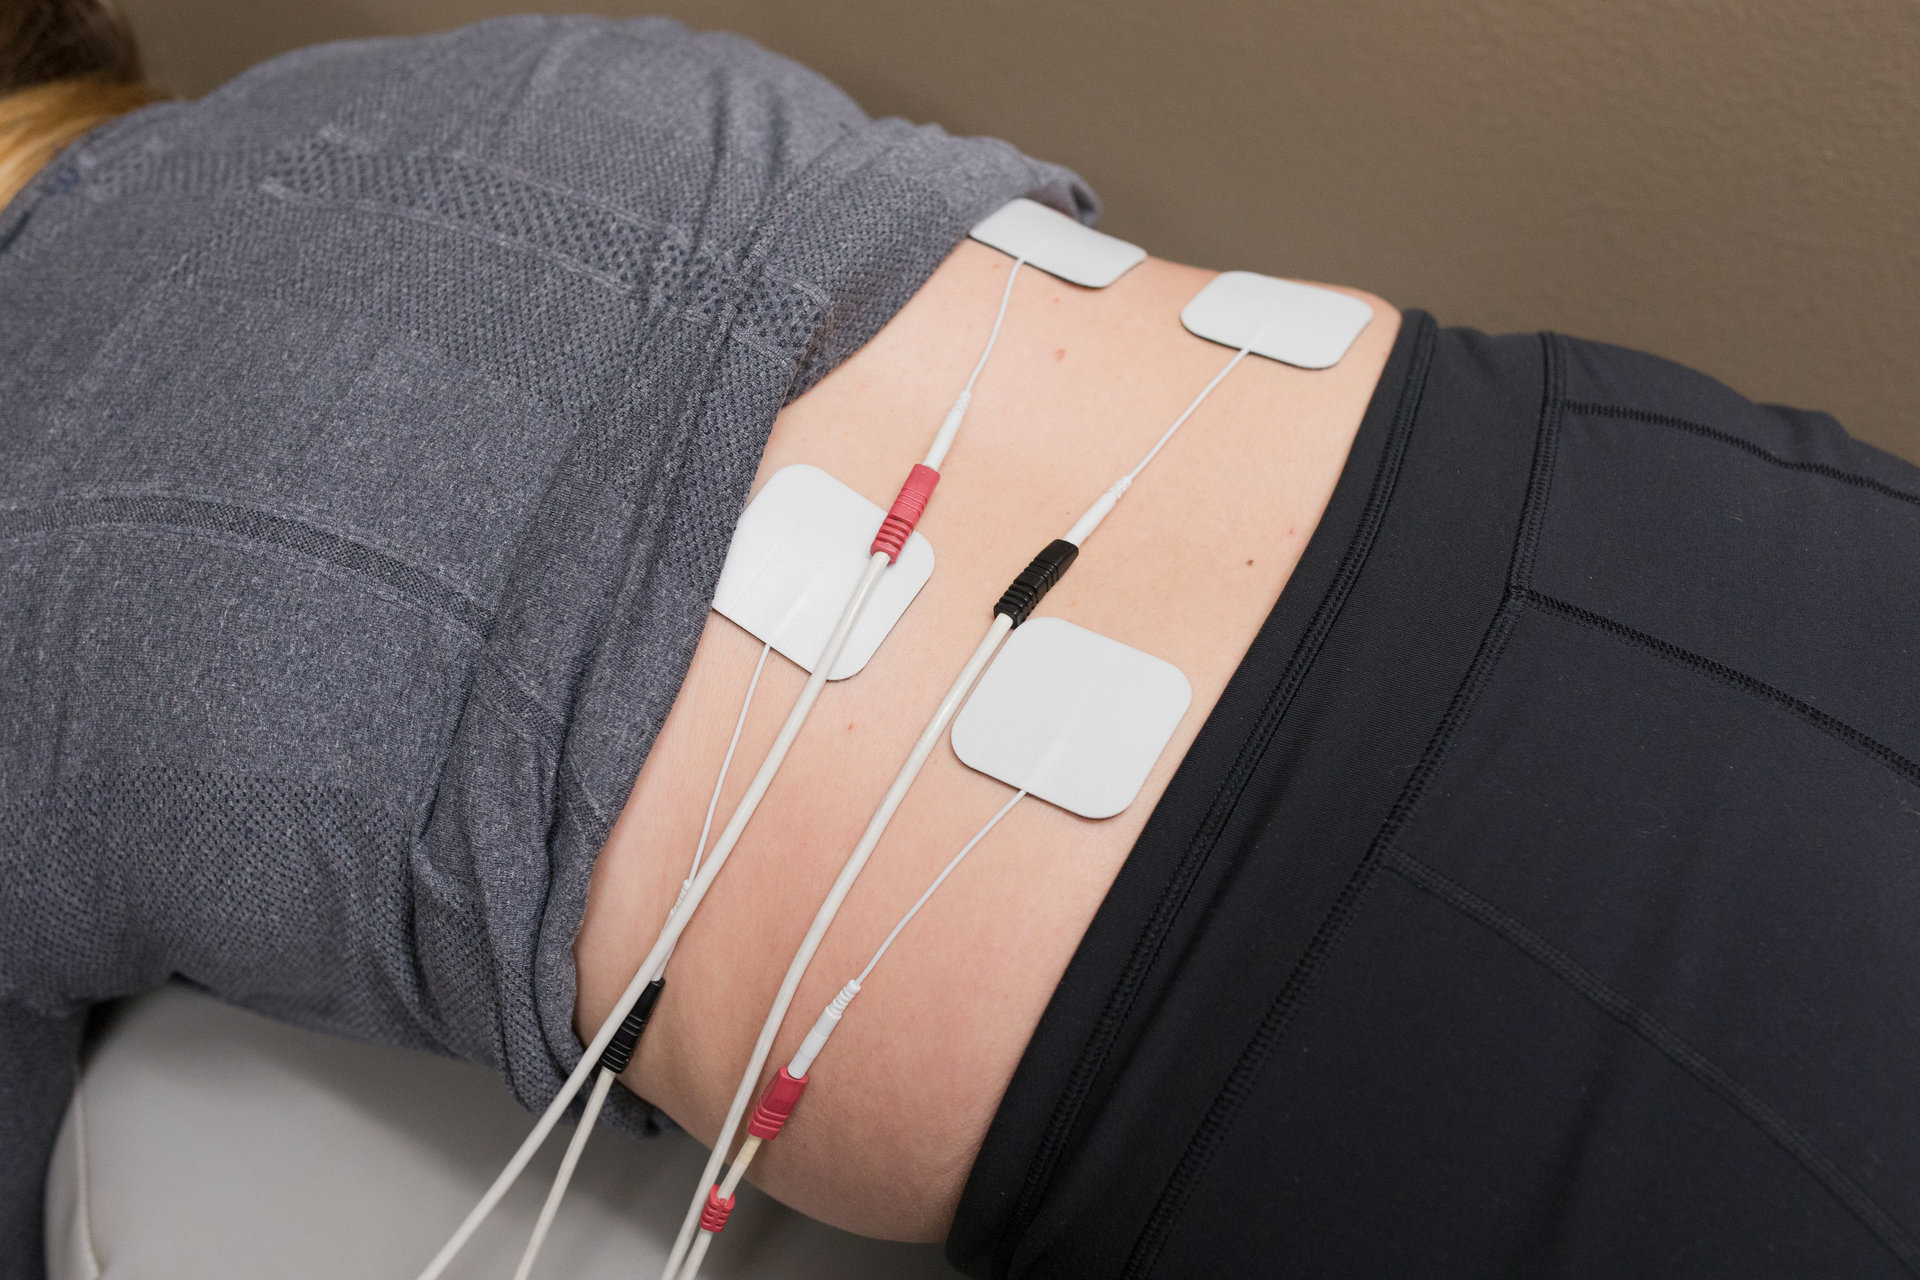 Electrical Muscle Stimulation: What is EMS, how can it help your